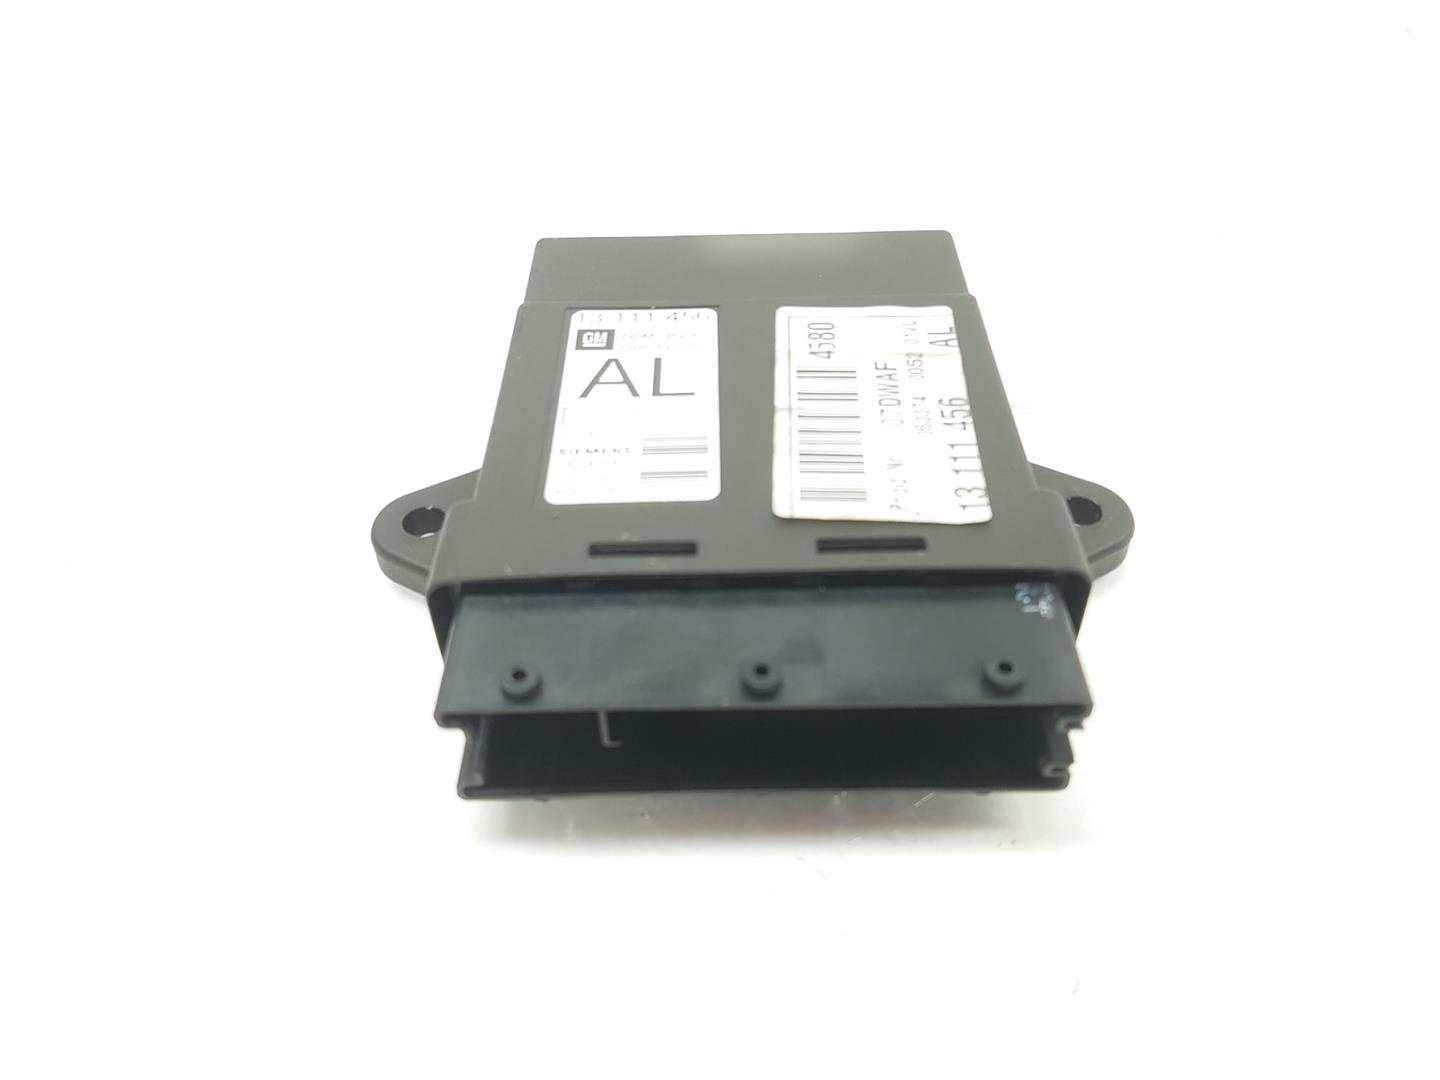 OPEL Vectra C (2002-2005) Other Control Units 13111456, 13111456 24224810